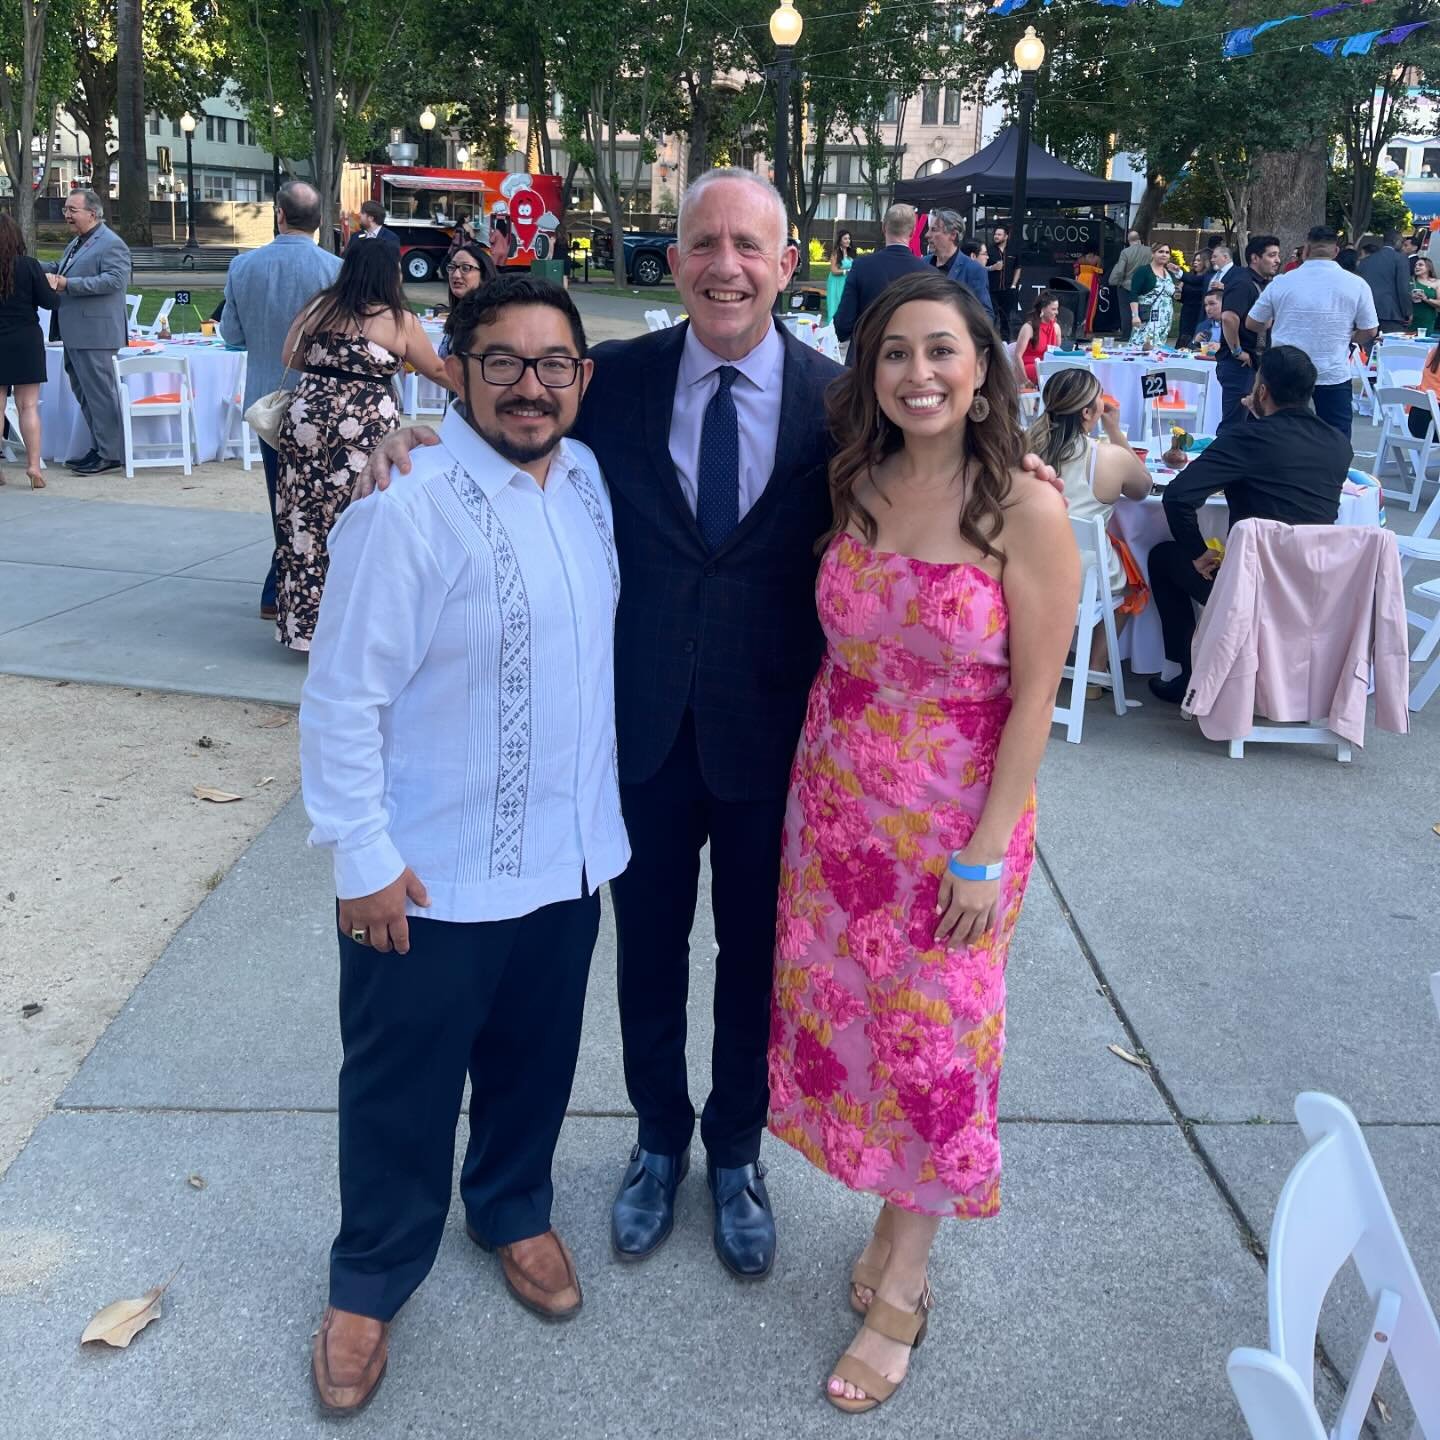 Sacramento Hispanic Chamber of Commerce&rsquo;s Salud Awards celebration in downtown Sacramento&rsquo;s Cesar Chavez Park honoring the small businesses of the year and our Mayor Darrell Steinberg. Joined by my colleagues Councilmember Eric Guerra, Co